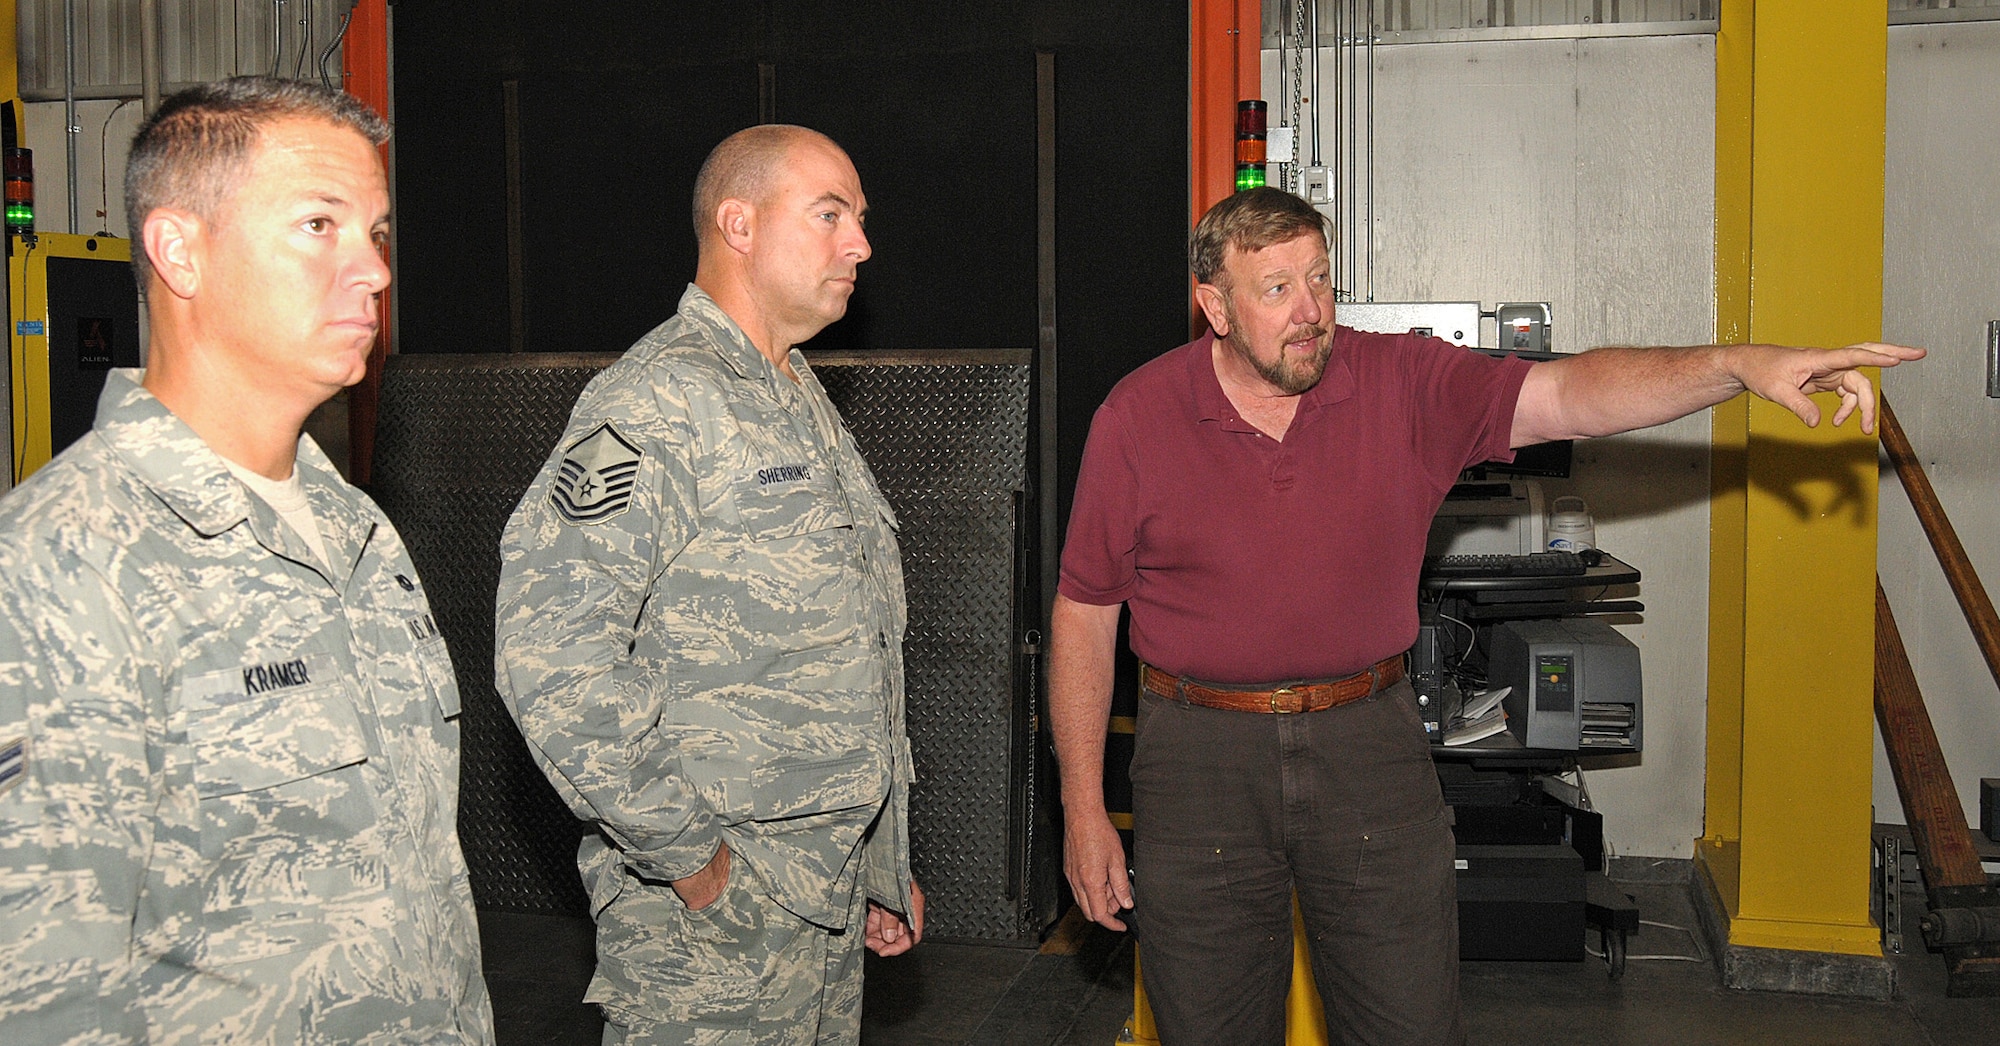 Mr, Charles Carr, Weight Supevisor 7 in Air Terminal Operations, conducts a tour of the terminal warehouse facility for Master Sergeant Burt Sherring and Airman First Class Jesse Kramer from the Air Terminal Operations Squadron, 146th Airlift Wing, Channel Islands Air National Guard Station, Calif.  on June 6, 2011. Mr. Carr briefed the members on the various equipment available to them as well as safety protocol.  The 146th AW sent three squadrons to Joint Base Elmendorf-Richardson, Anchorage, Alaska on Saturday, June 4, 2011. The Air Terminal Operations Squadron, Logistics Readiness Squadron, and the Security Force Squadron moved down range to complete there respective annual training requirements.(Photo by Tech. Sgt. Alex Koenig)